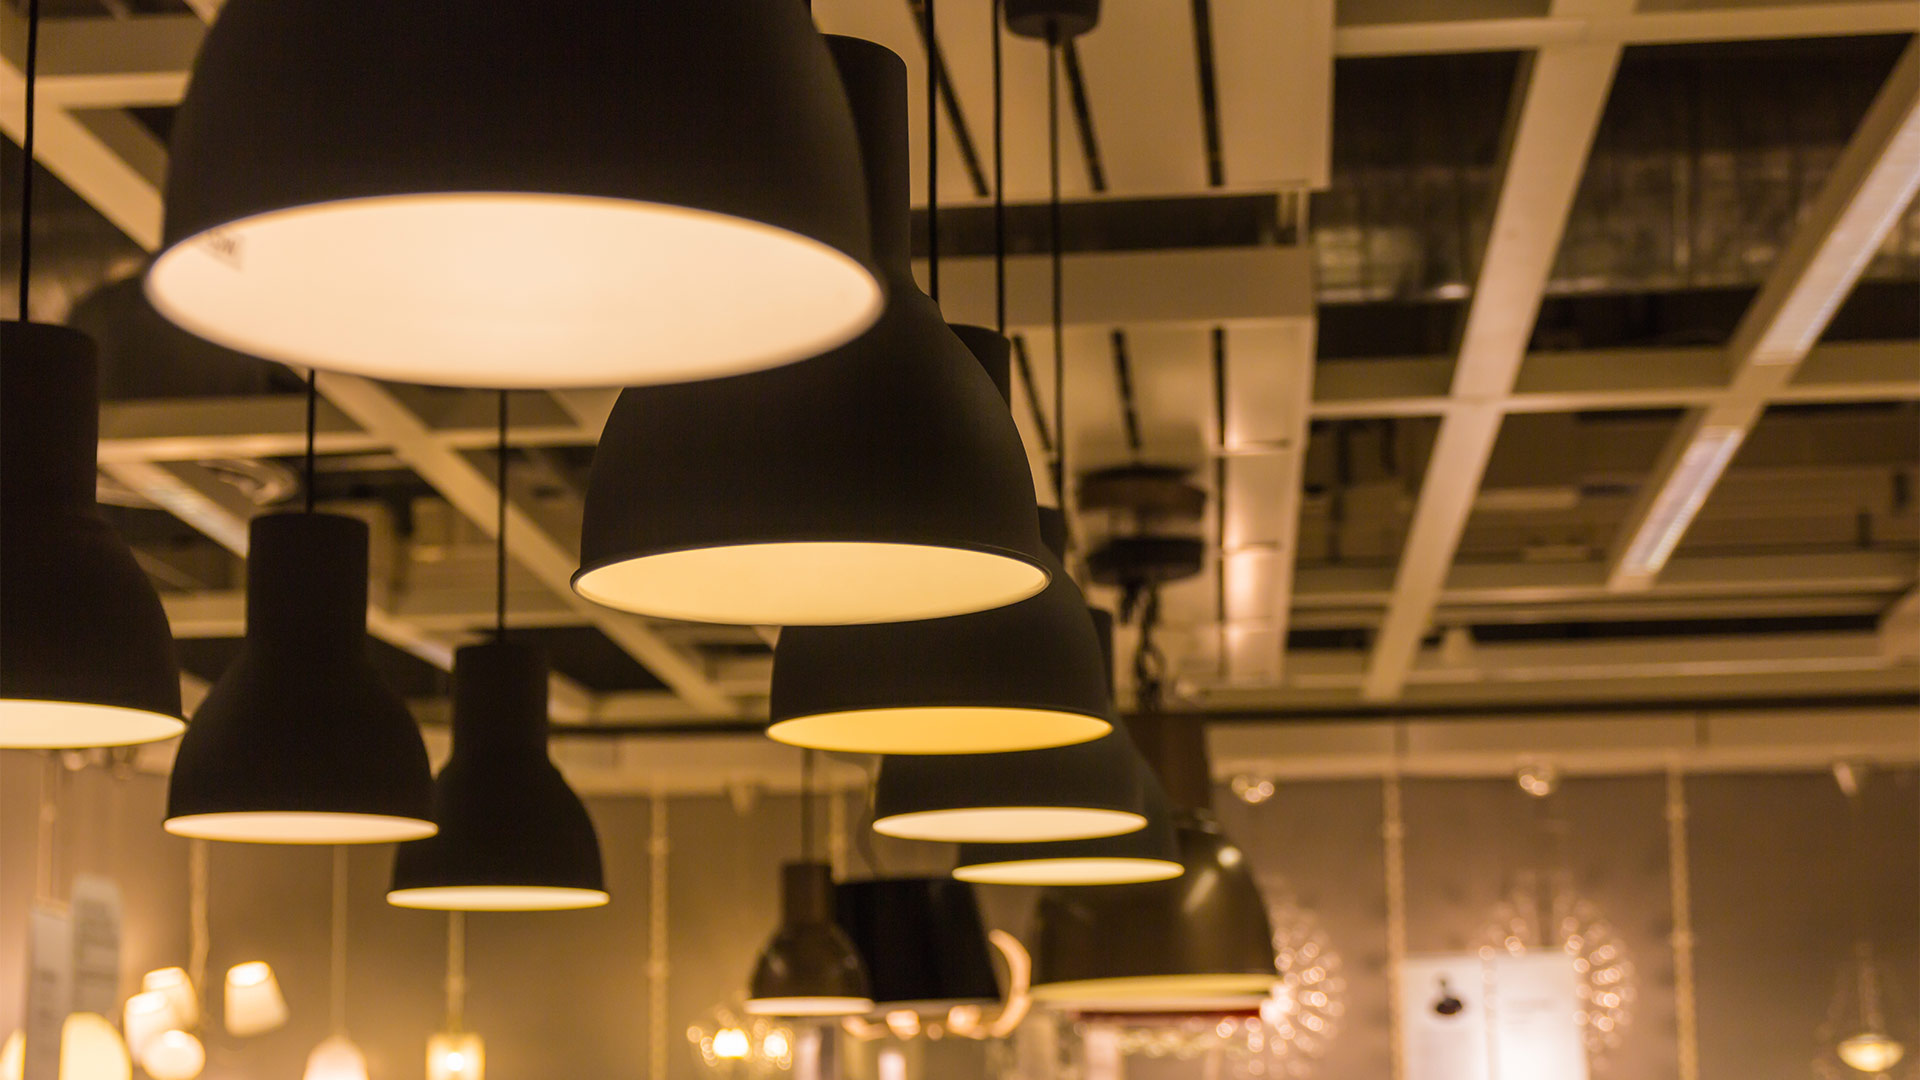 modern ceiling lights installed at commercial building interiors